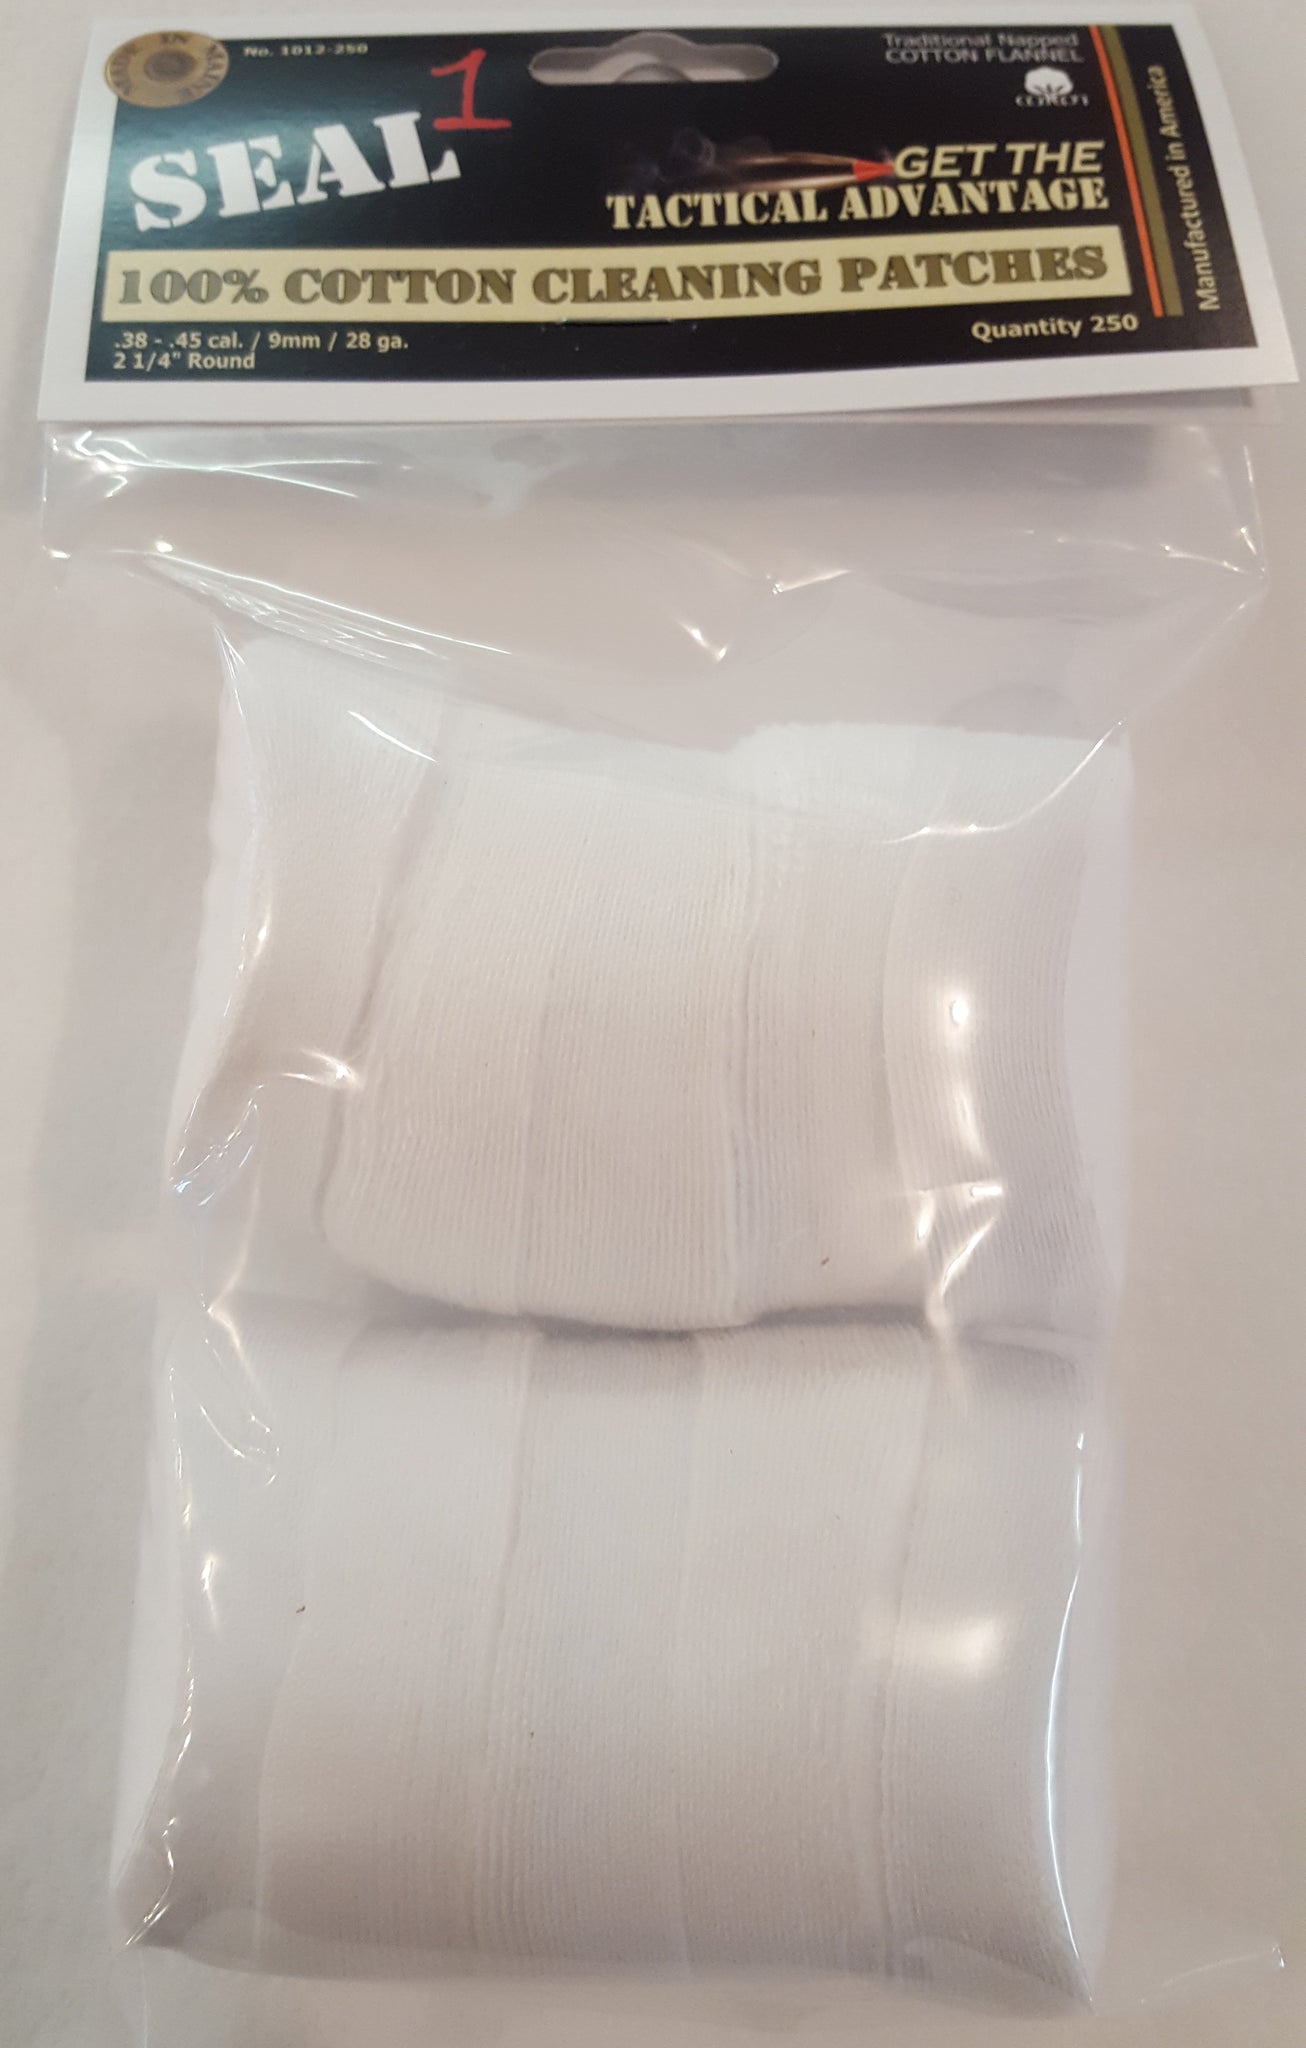 .38-.45, 9MM, 28ga .410 2 1/4" Cleaning Patches Bag of 250